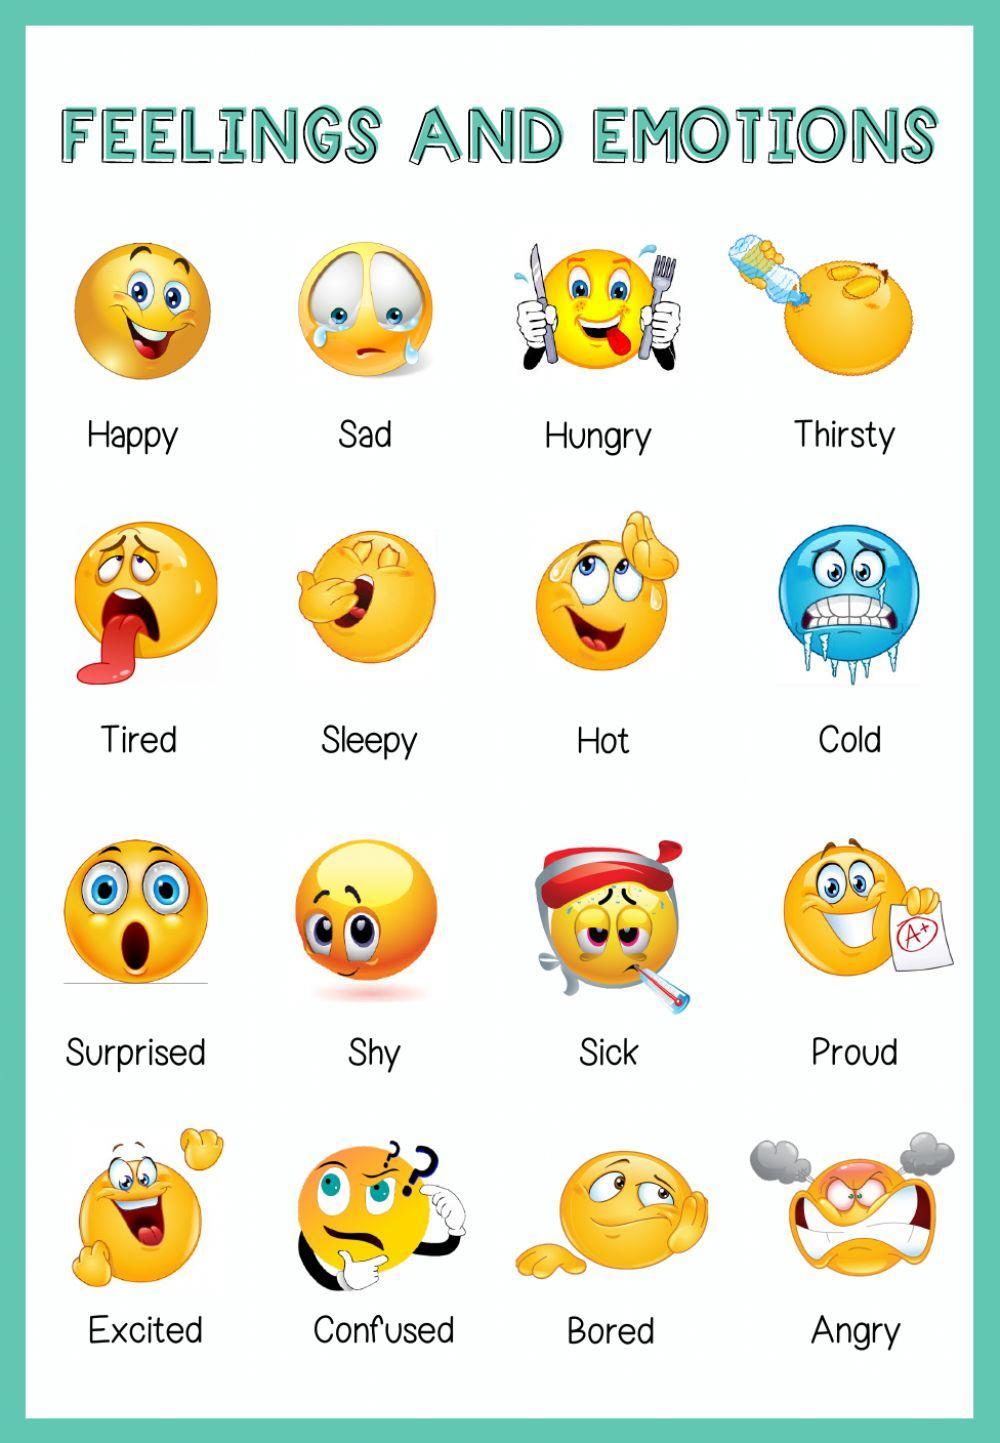 Feelings and emotions interactive exercise for 4TH | Live Worksheets